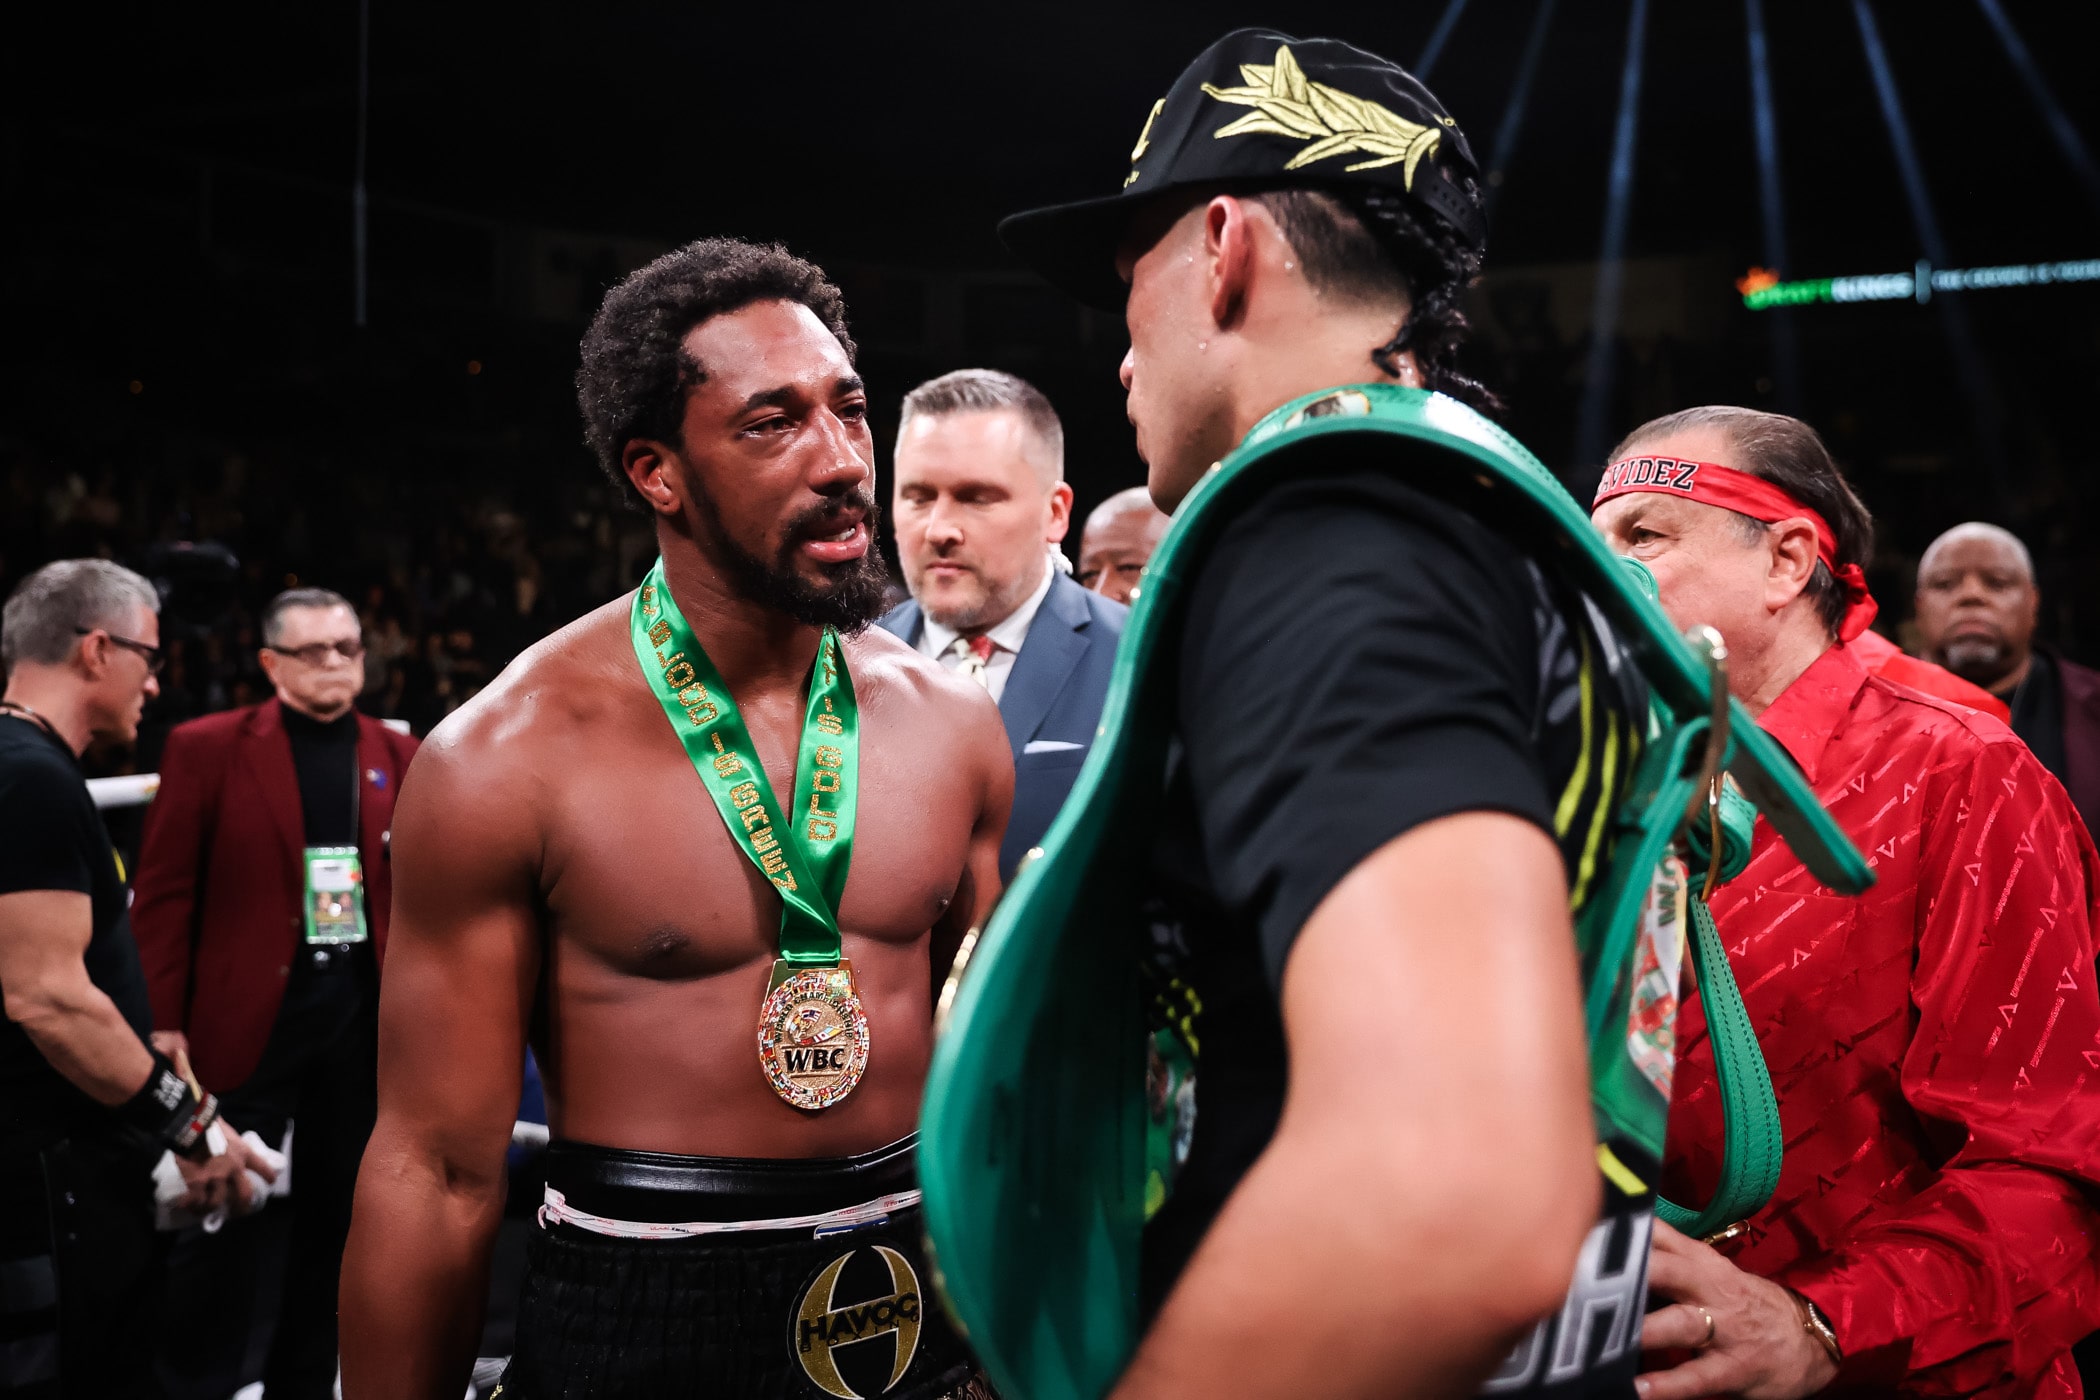 Andrade praises Benavidez following stoppage defeat: 'He’s a hell of a fighter'